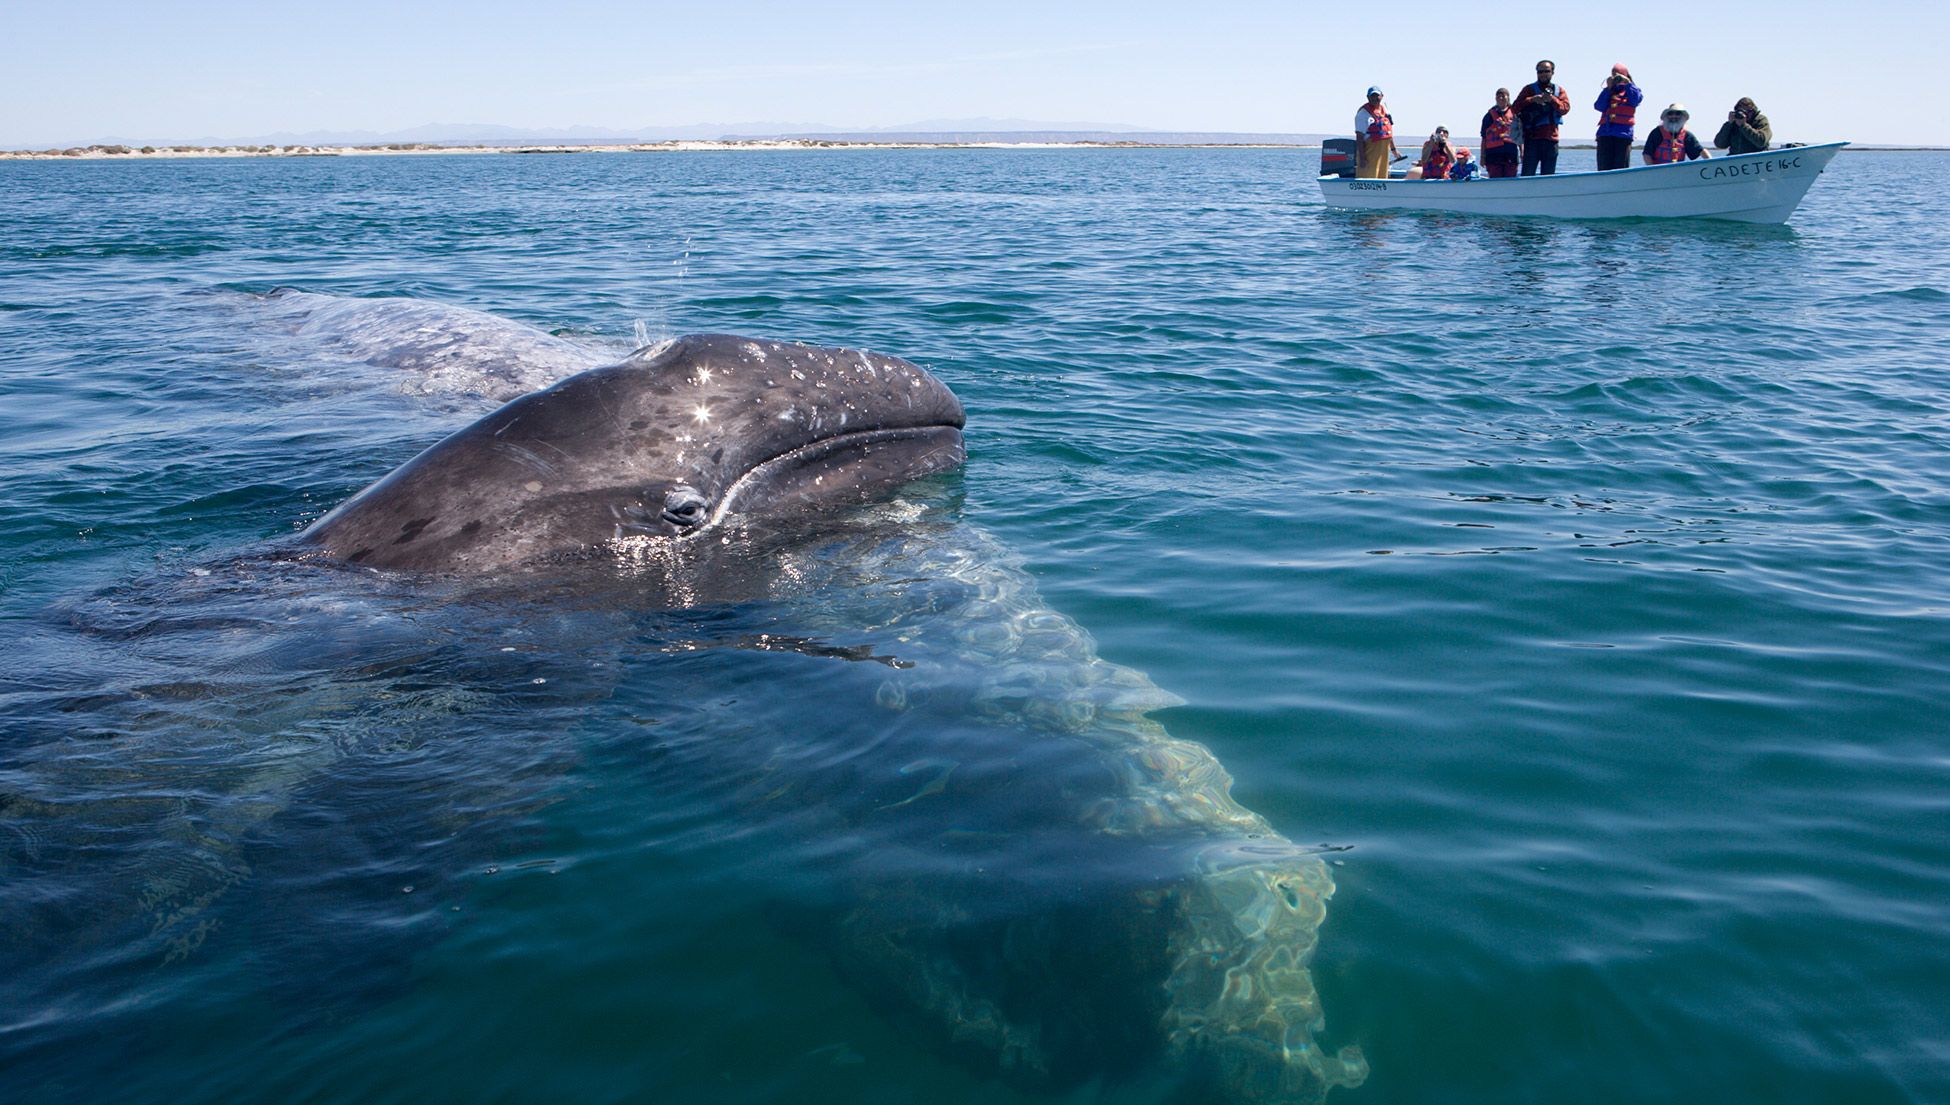 Grey whales taught me how to mother, how to endure, how to live | Psyche